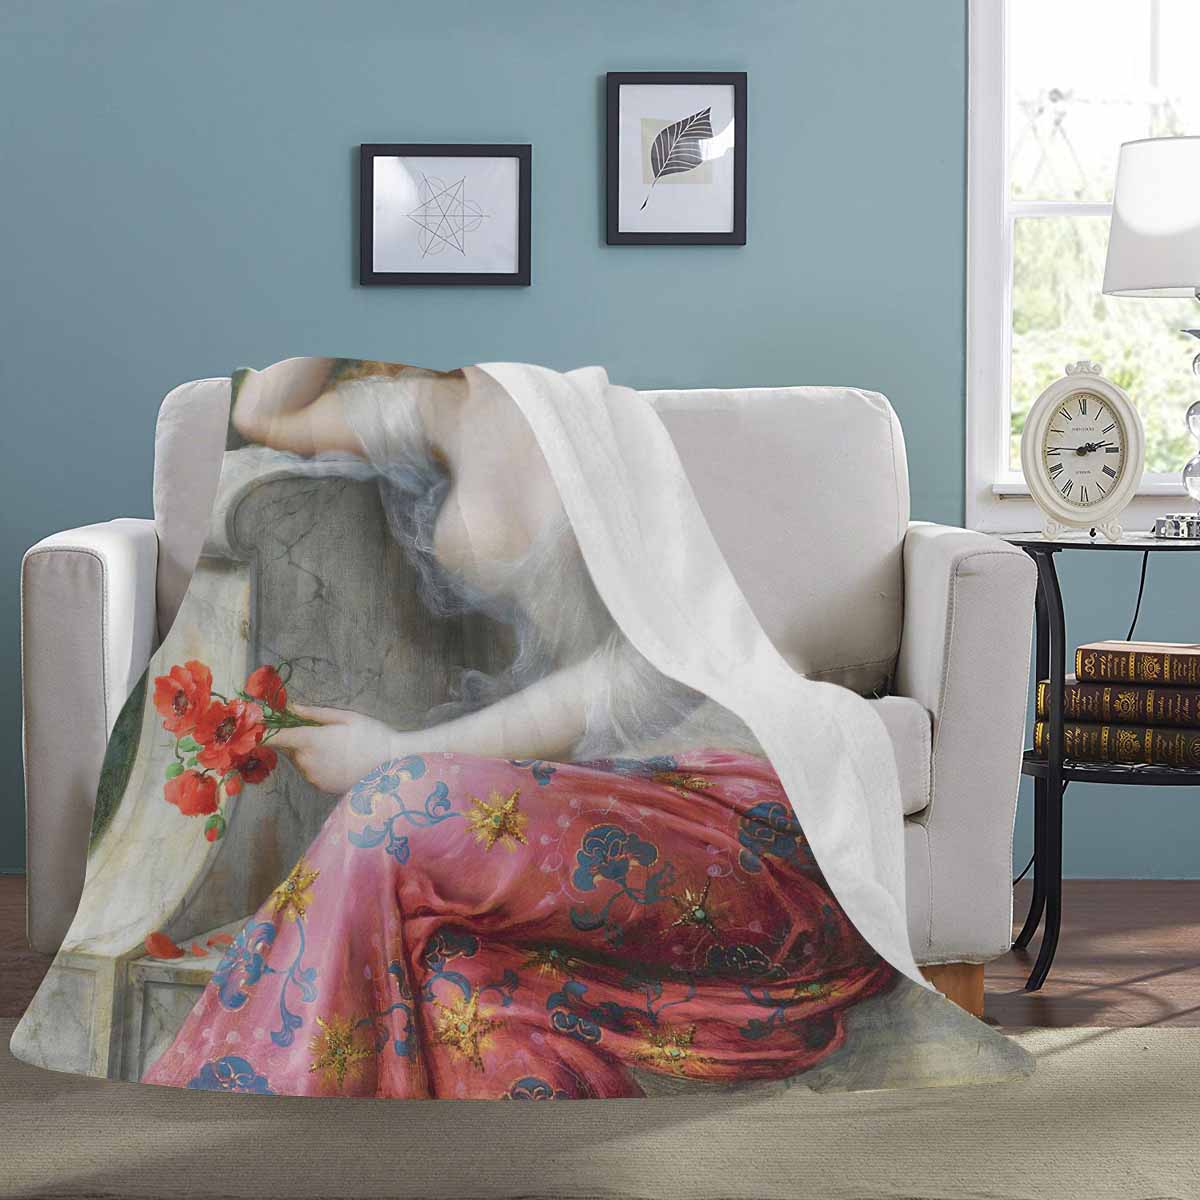 Victorian Lady Design BLANKET, LARGE 60 in x 80 in, Young Beauty With Poppies